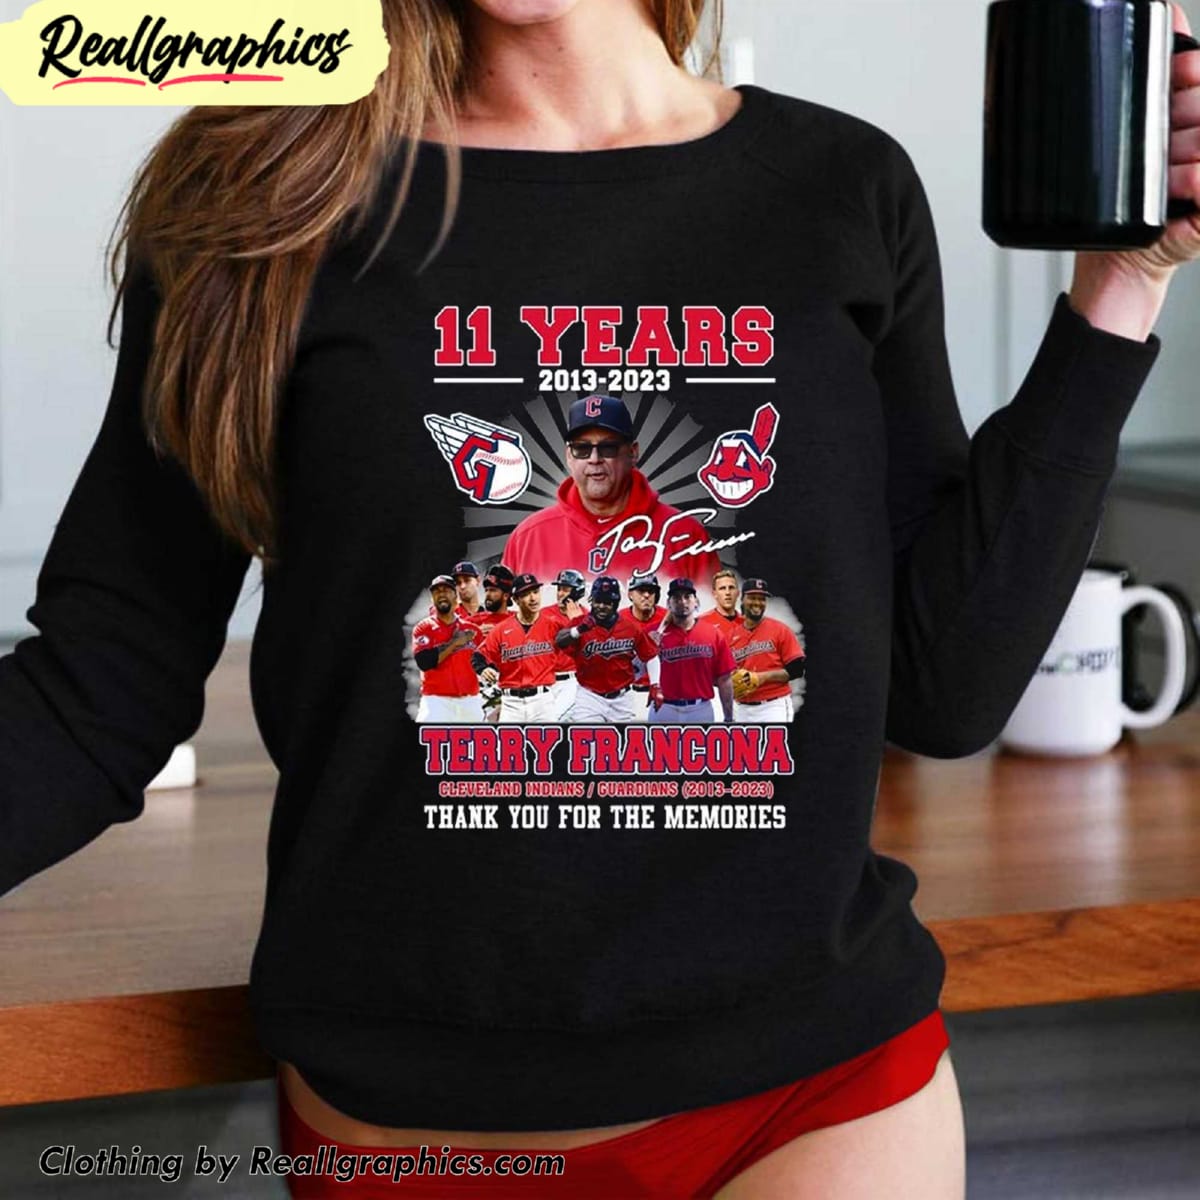 11-years-2013-2023-terry-francona-thank-you-for-the-memories-shirt-2